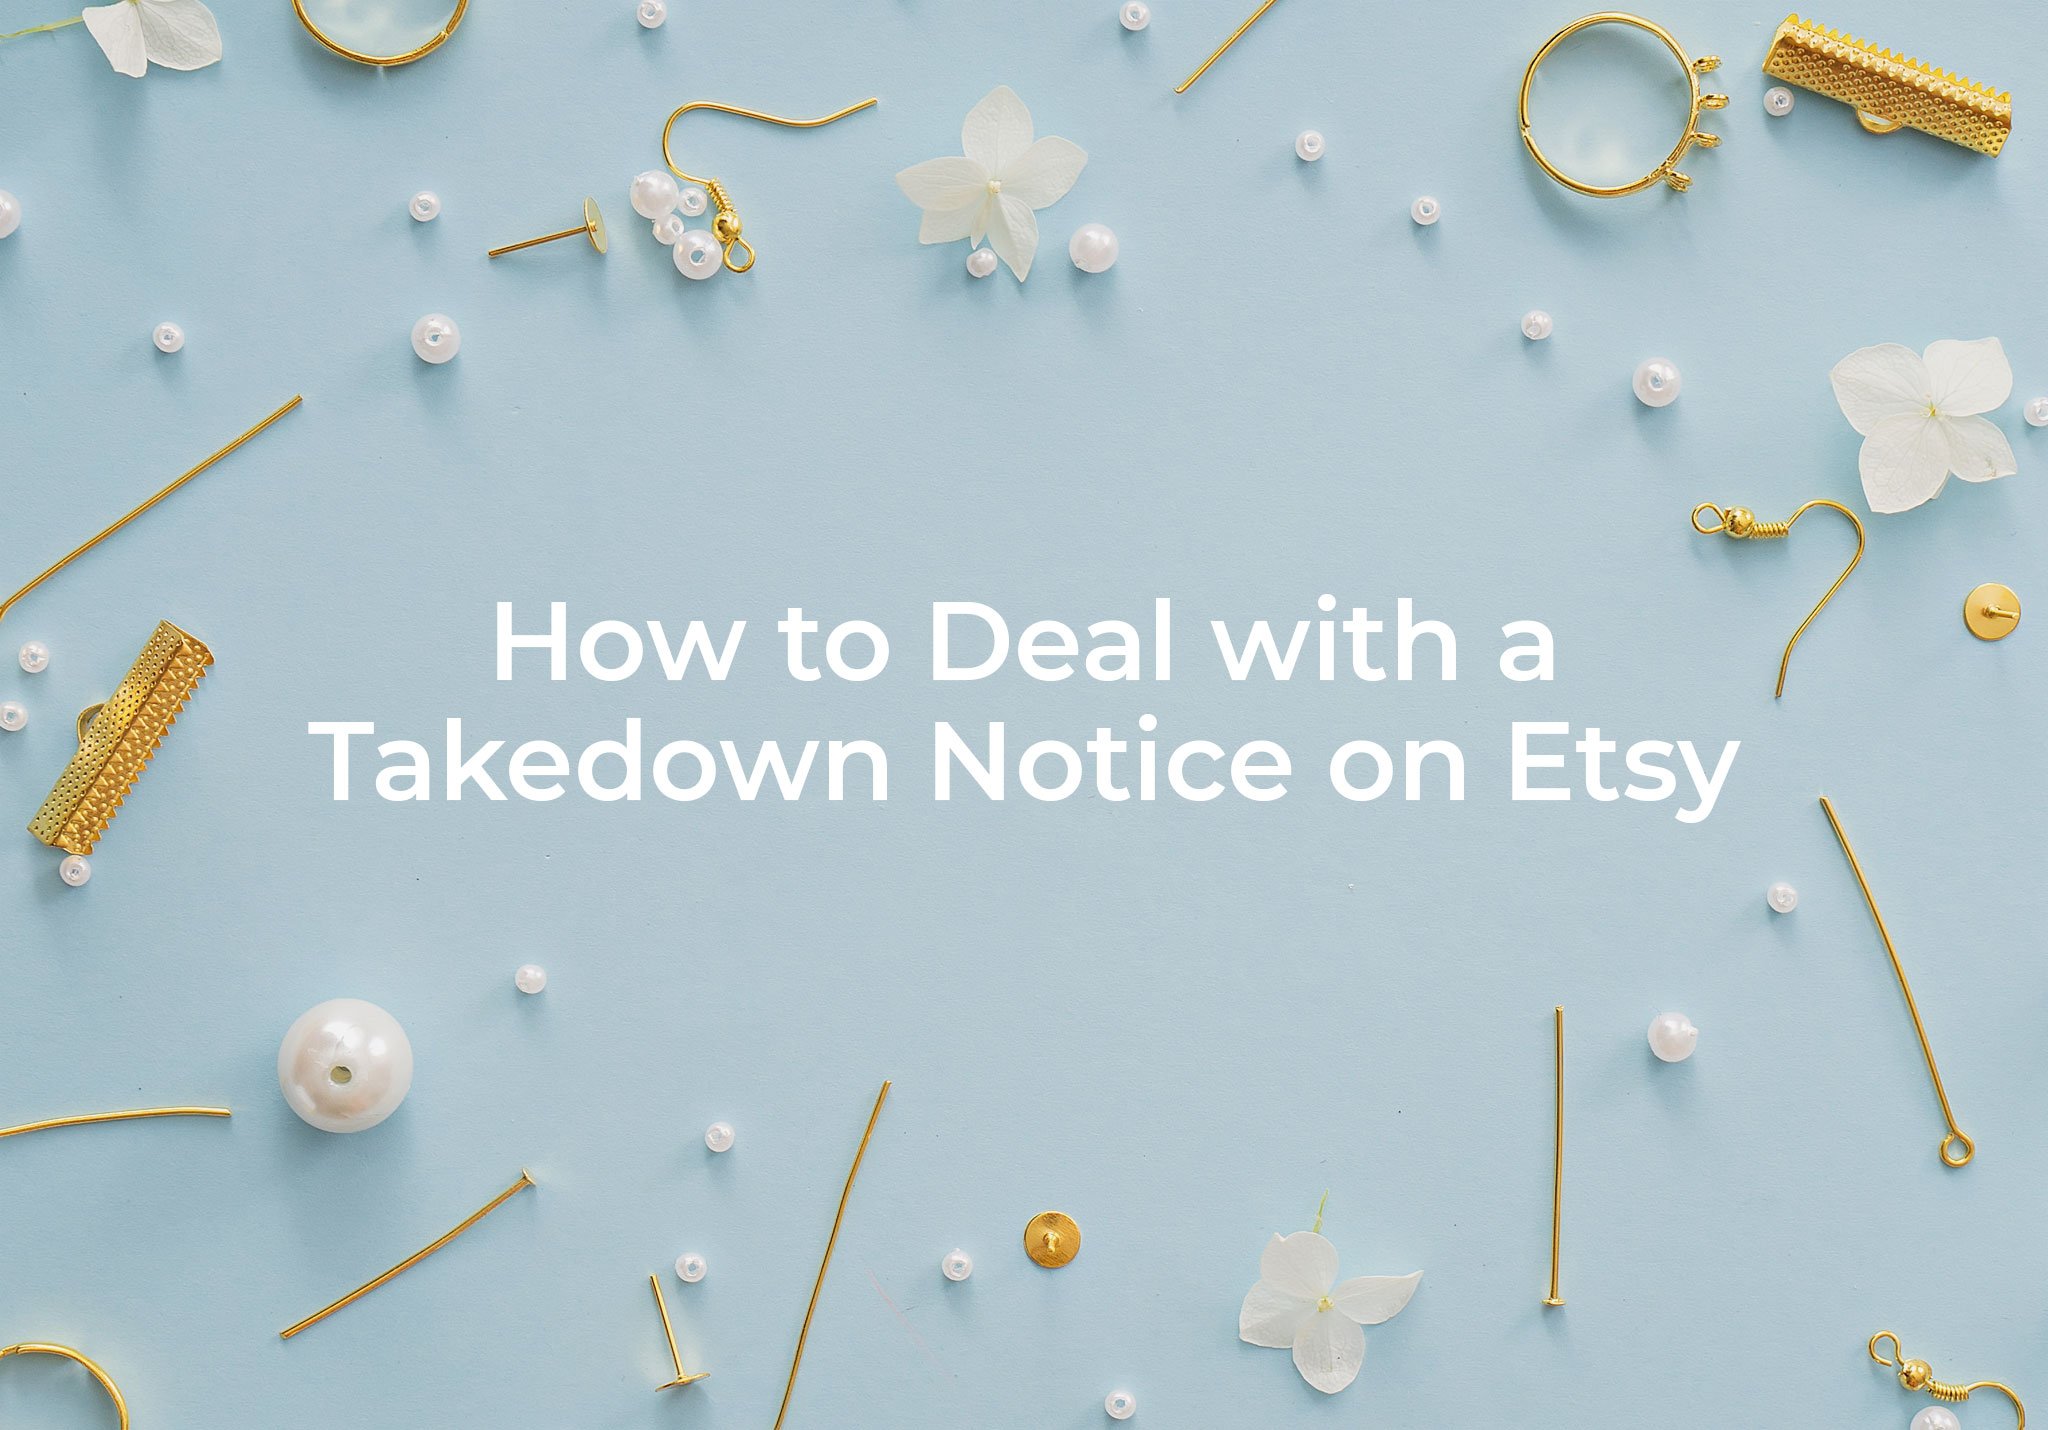 How to Deal with a Takedown Notice on Etsy